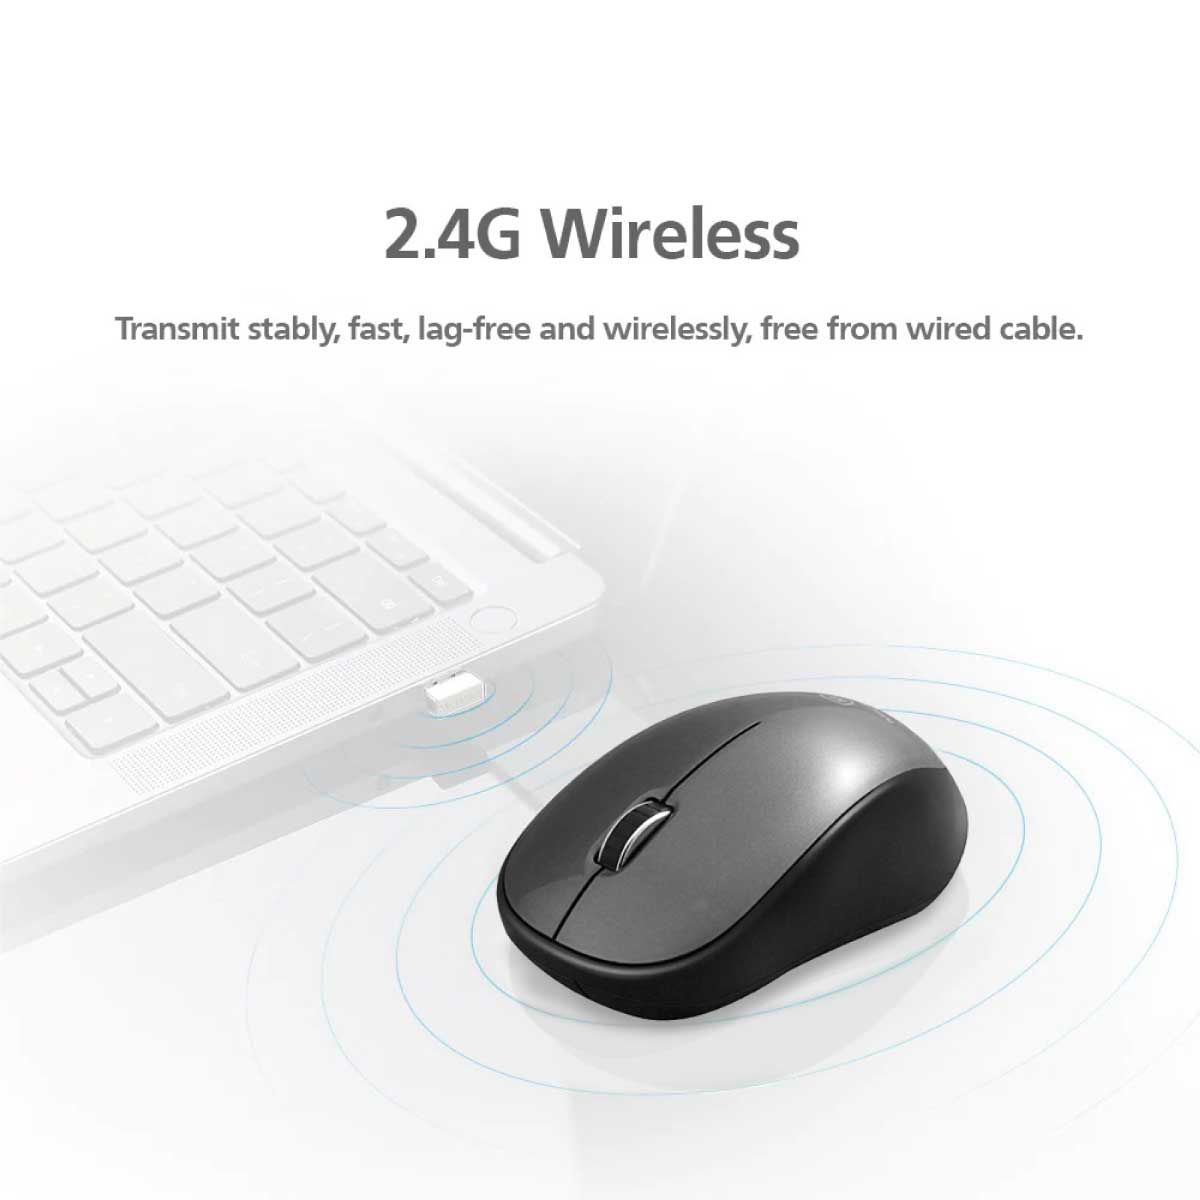 MOUSE (เมาส์ไร้สาย) MICROPACK MP-771W ST WIRELESS SILENT MOUSE (GRAY)